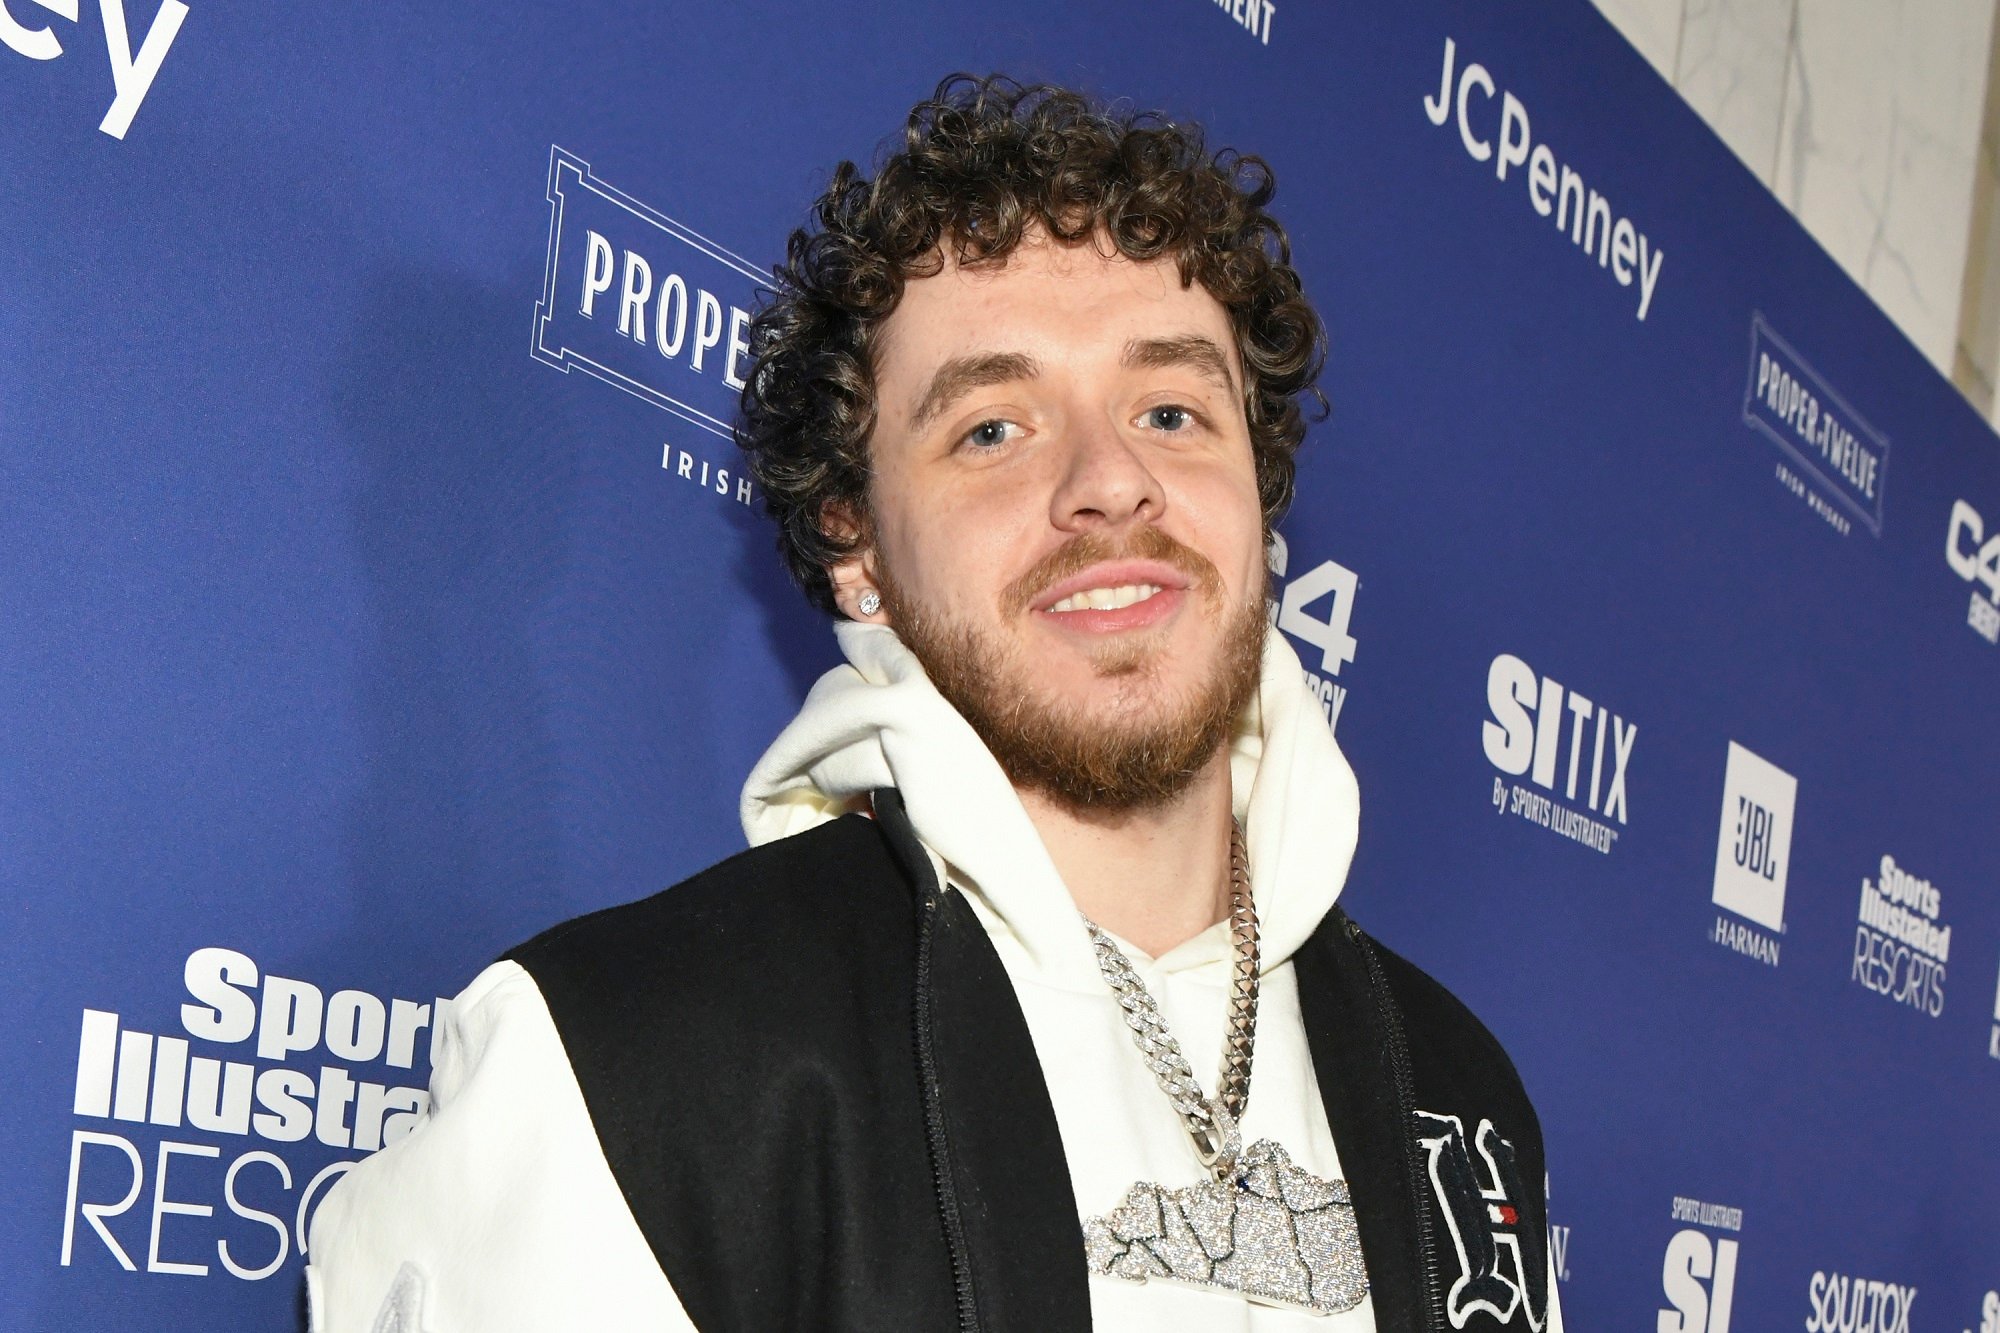 Jack Harlow attends the Sports Illustrated Super Bowl Party at Century City Park